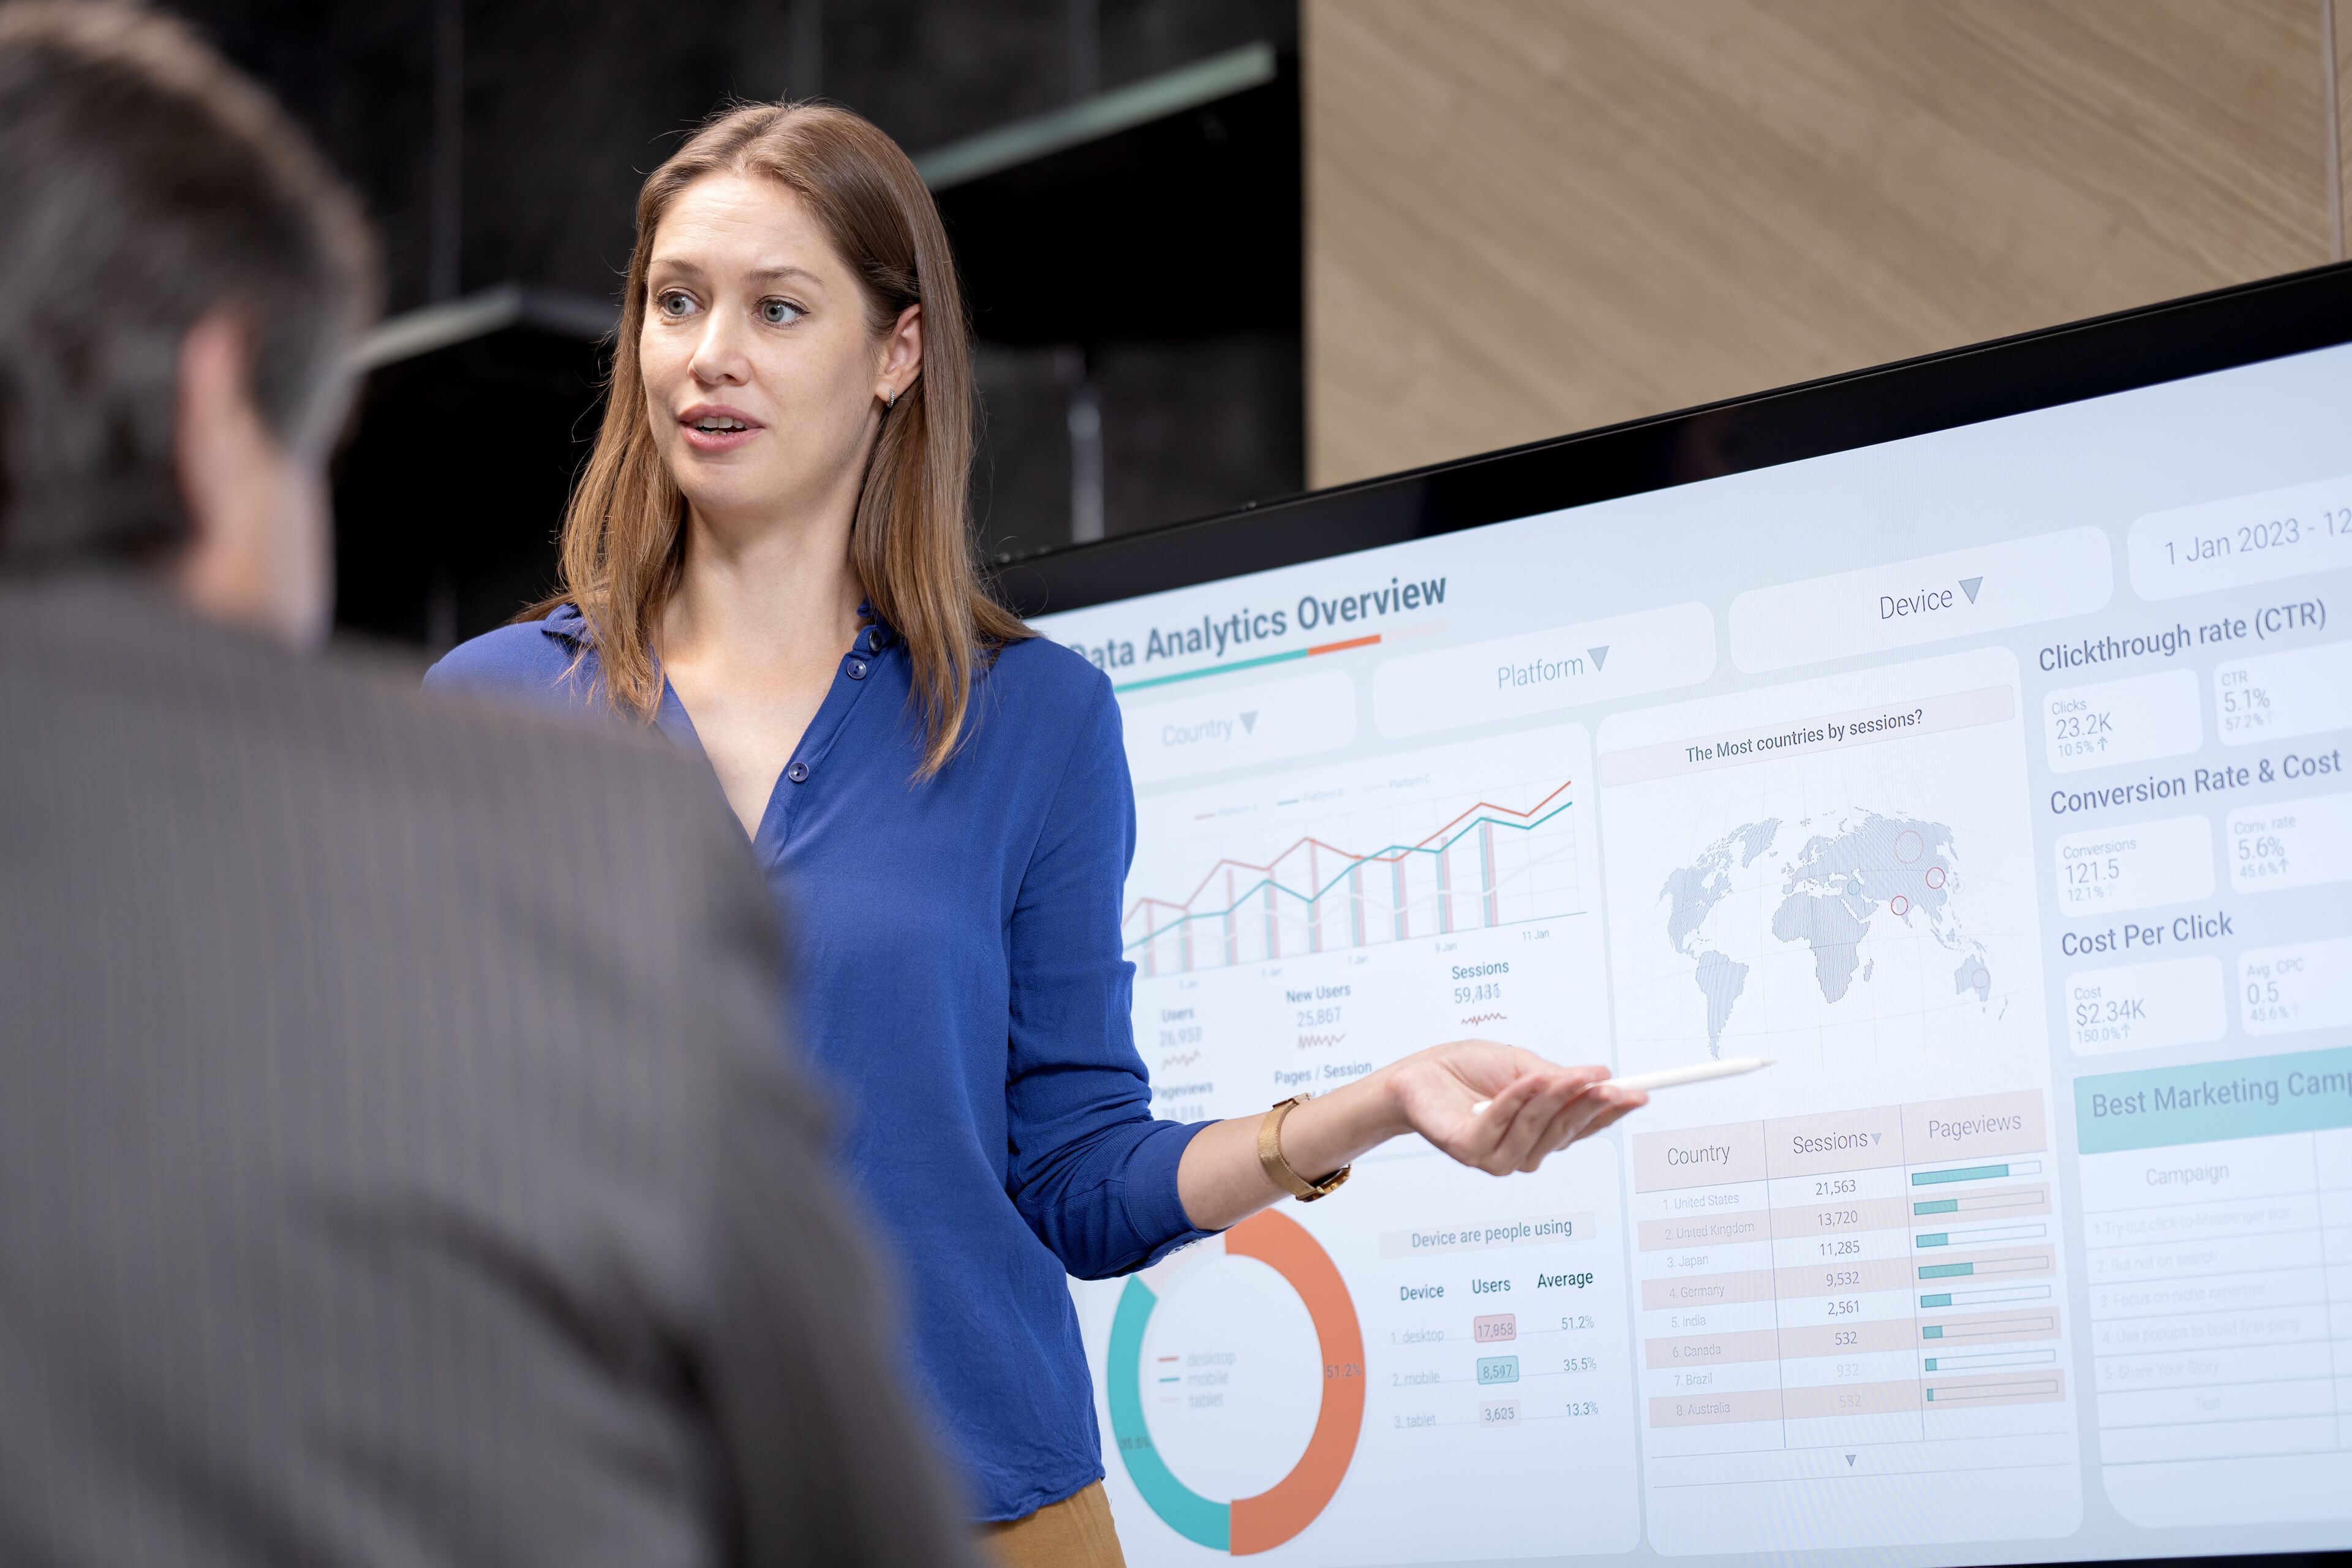 A professional presenting data analytics on a screen to a colleague, featuring graphs, world maps, and key performance metrics.